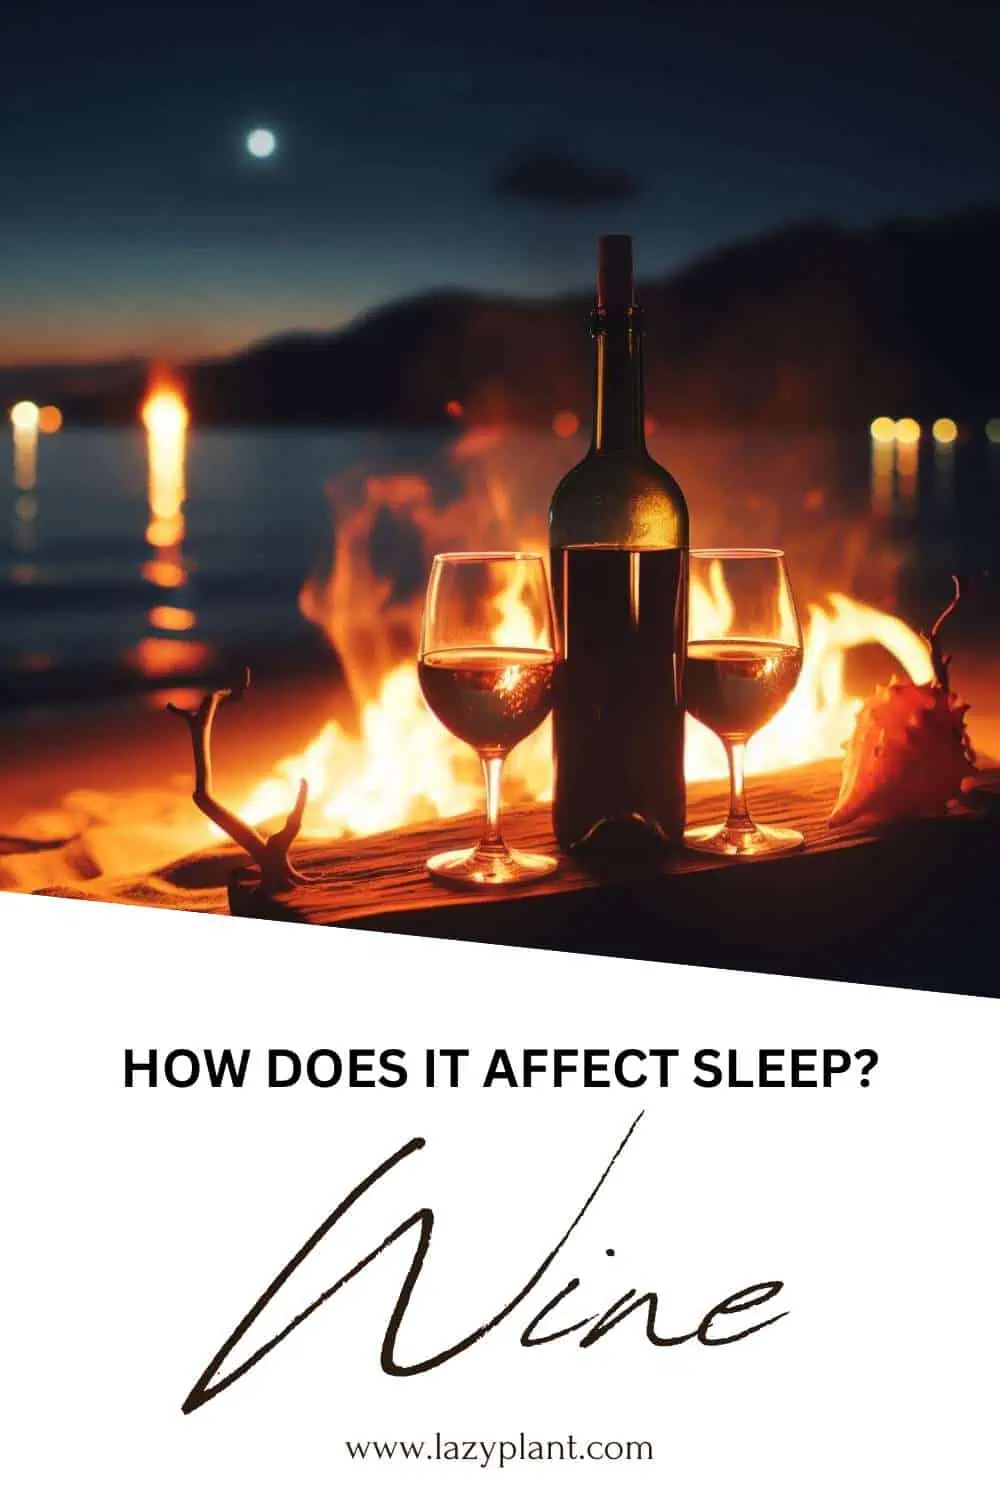 How to drink wine for better sleep?